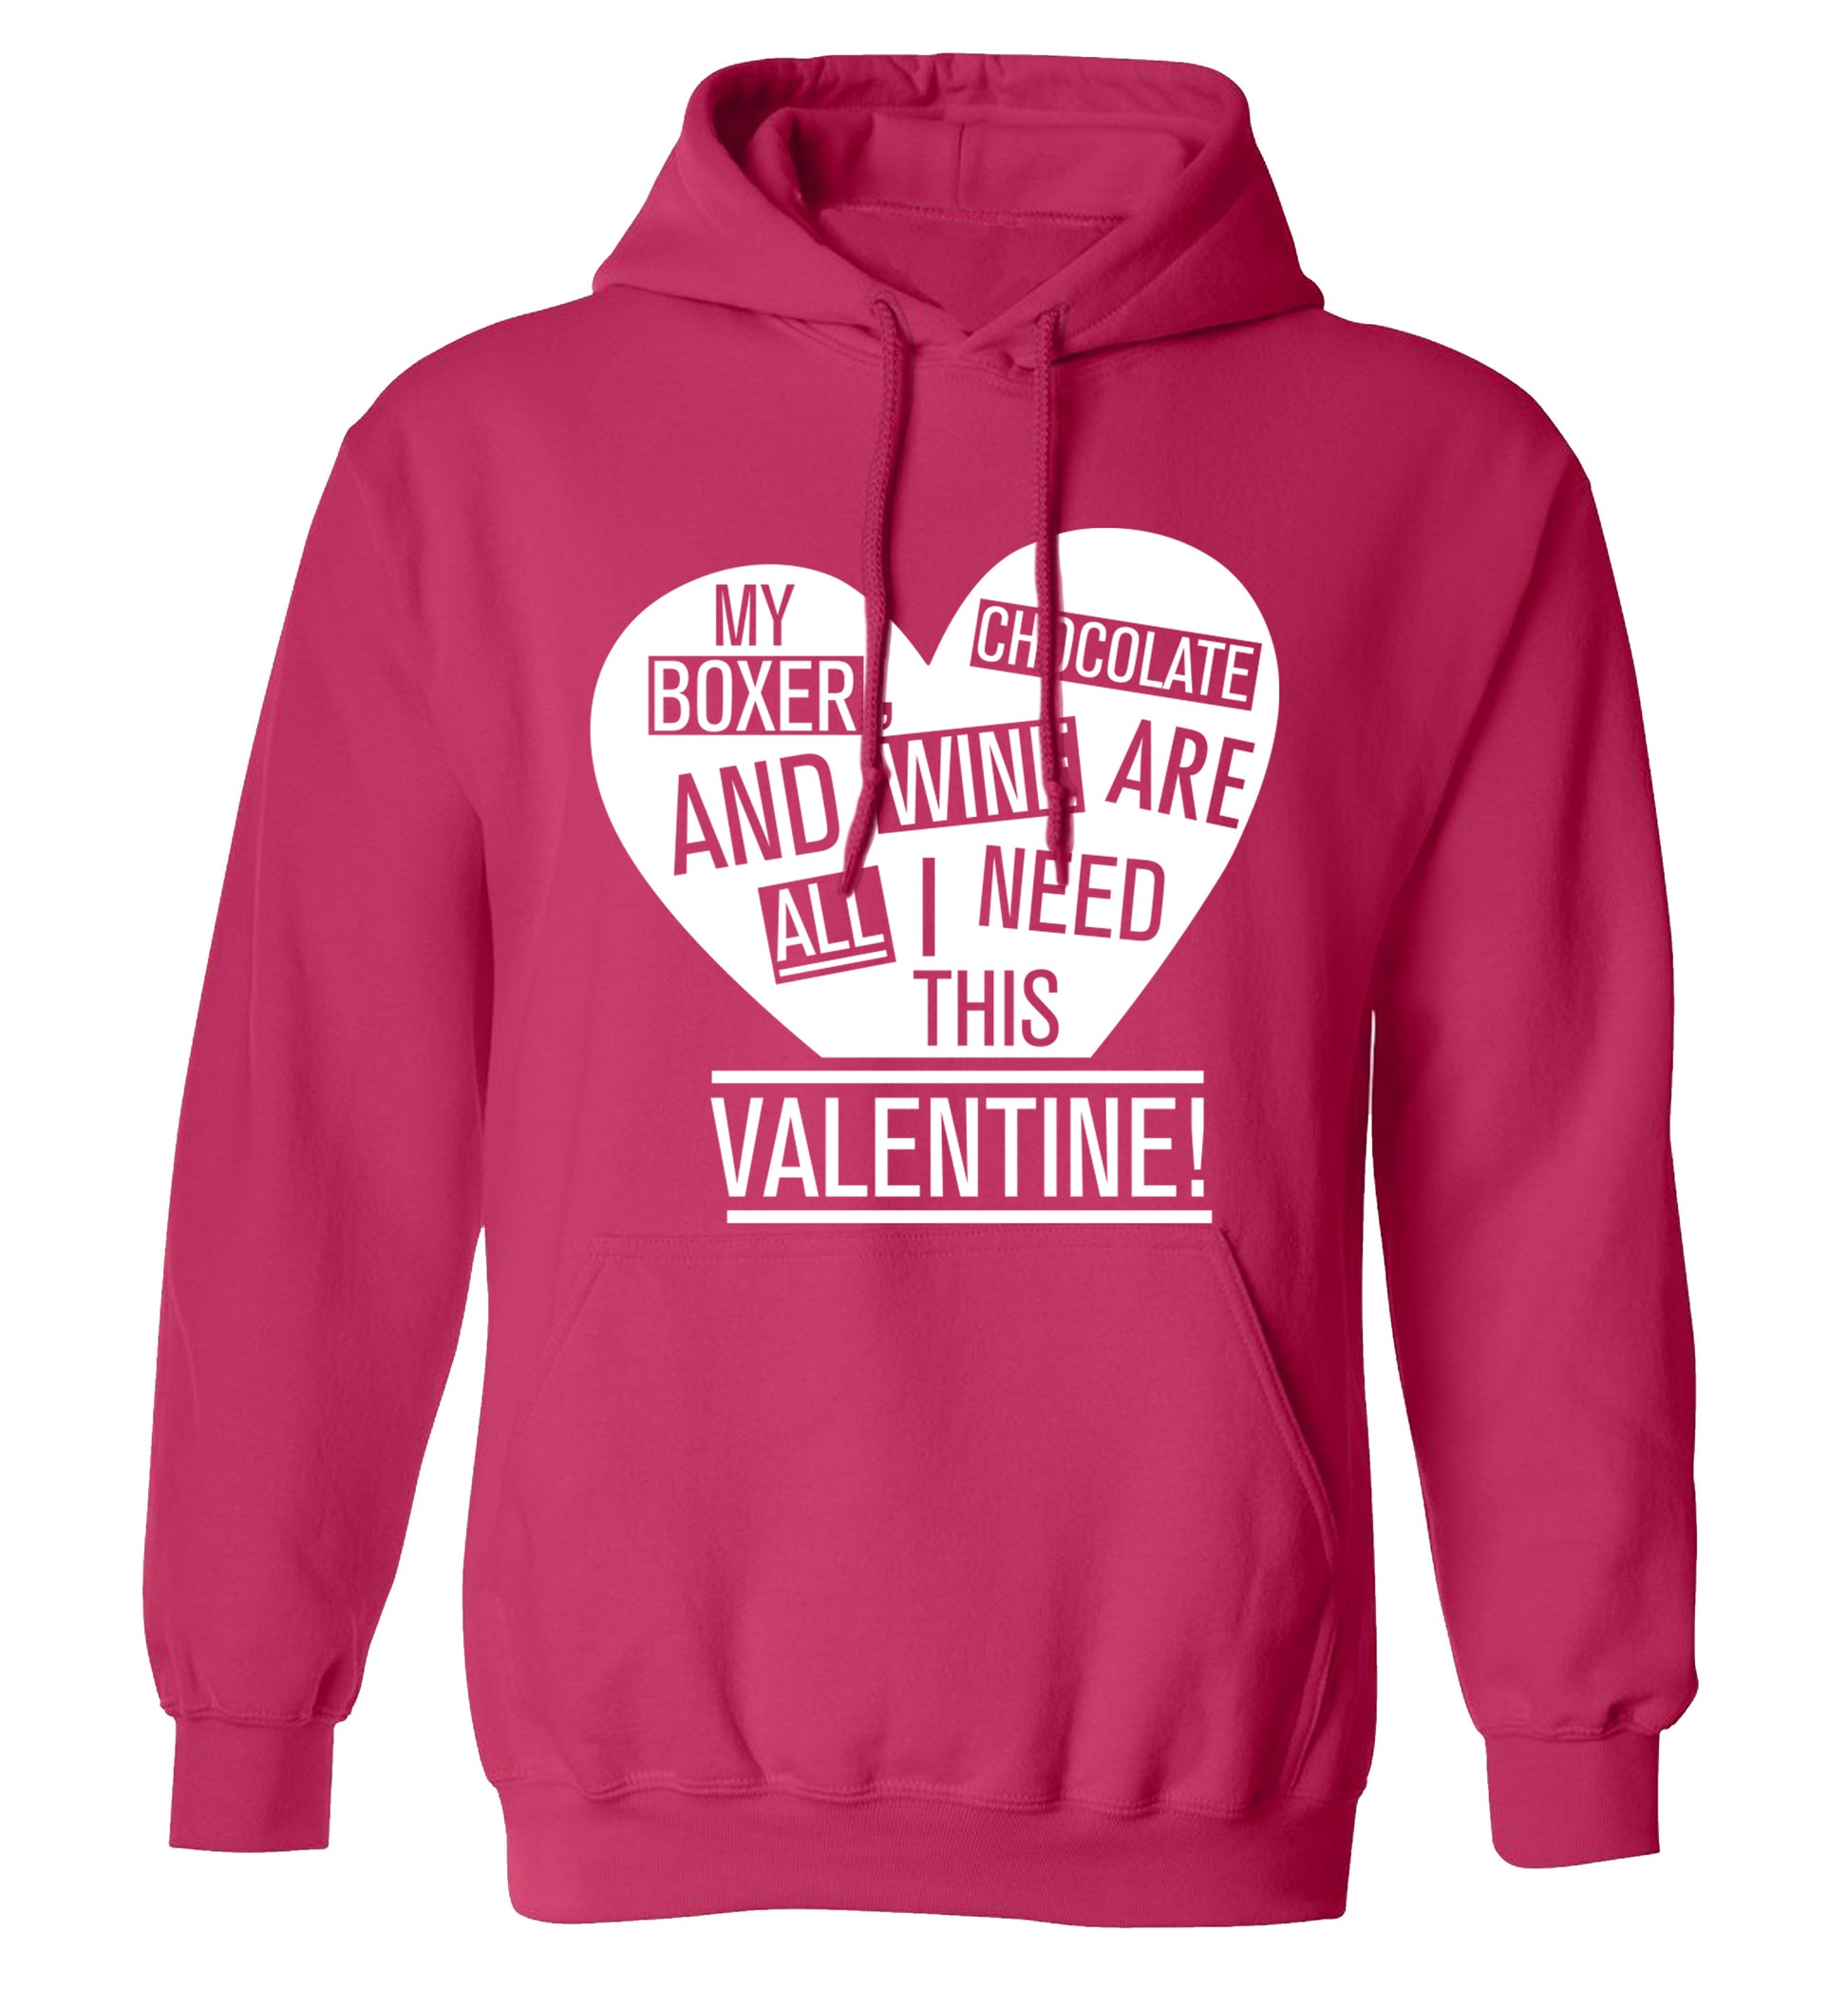 My Boxer, chocolate and wine are all I need this valentine! adults unisex pink hoodie 2XL